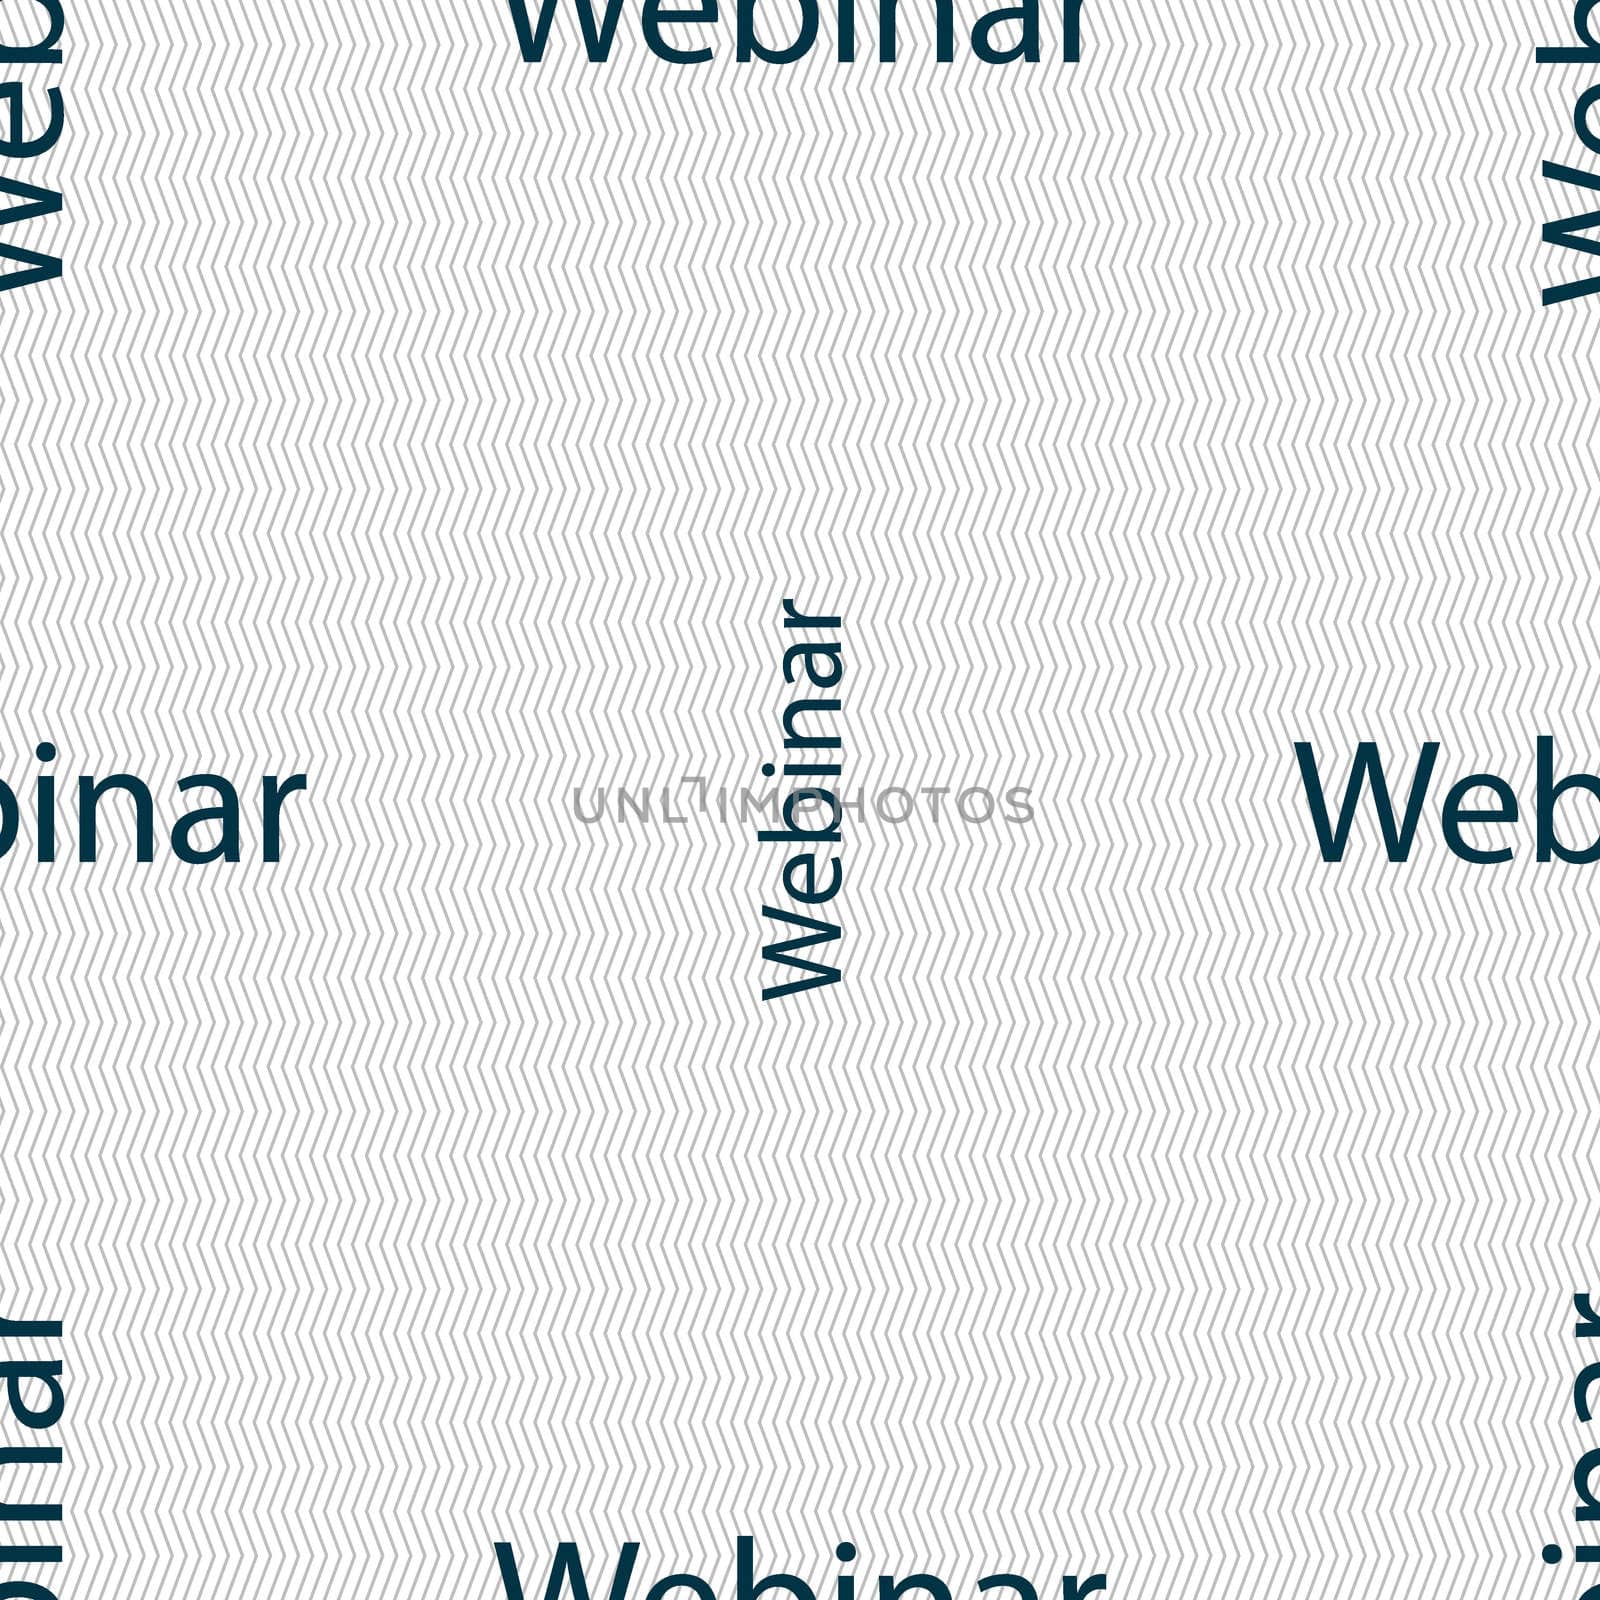 Webinar web camera sign icon. Online Web-study symbol. Seamless abstract background with geometric shapes. illustration